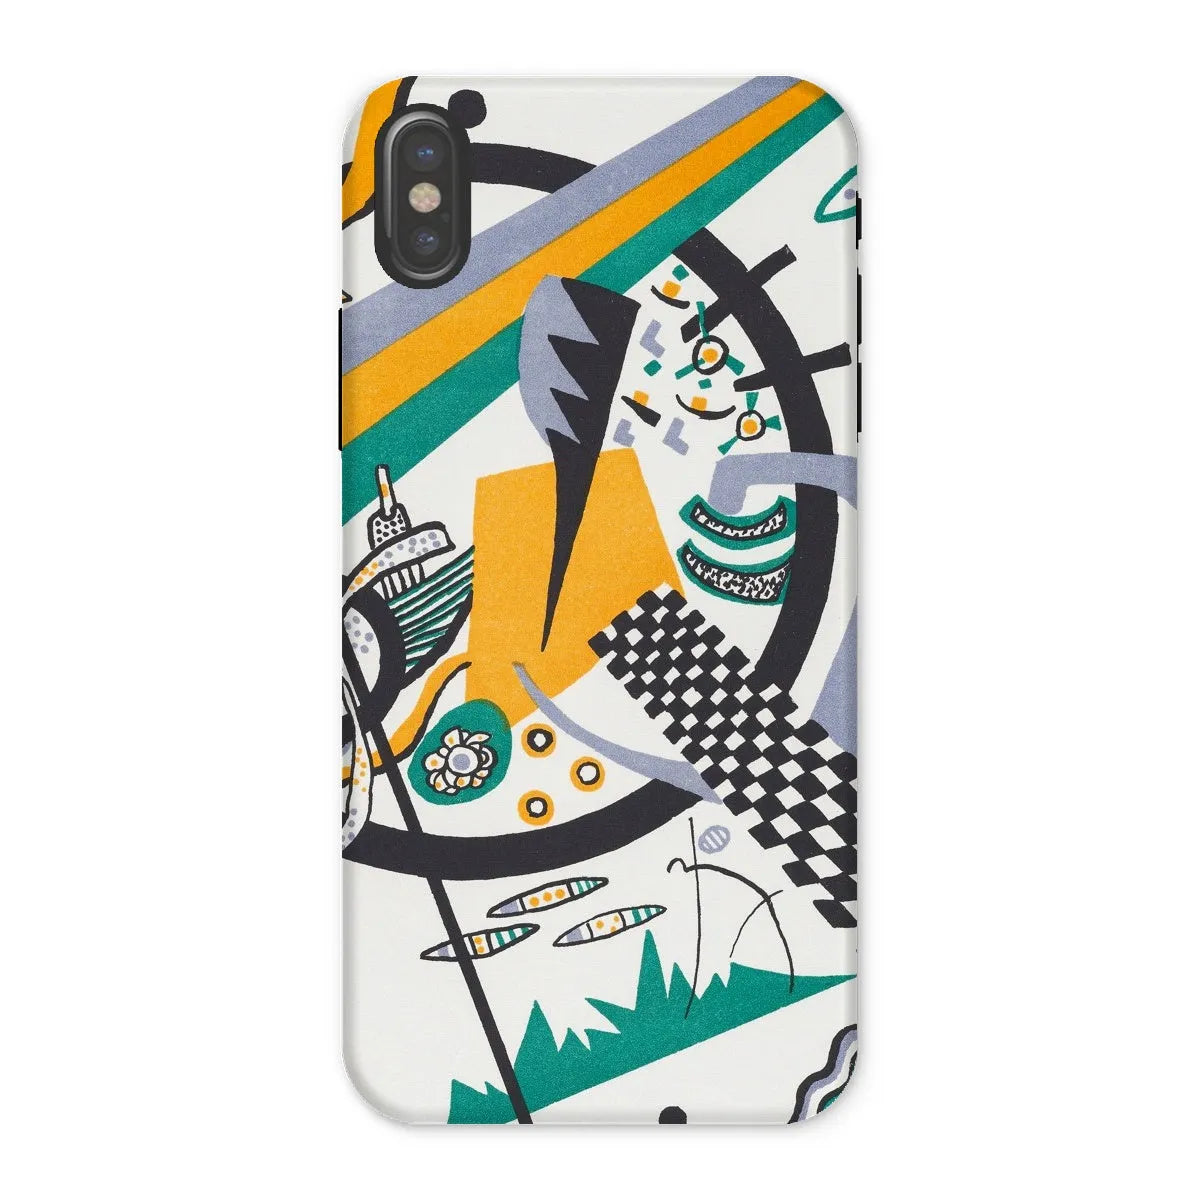 Small Worlds Iv - Expressionist Phone Case - Wassily Kandinsky - Iphone x / Matte - Mobile Phone Cases - Aesthetic Art